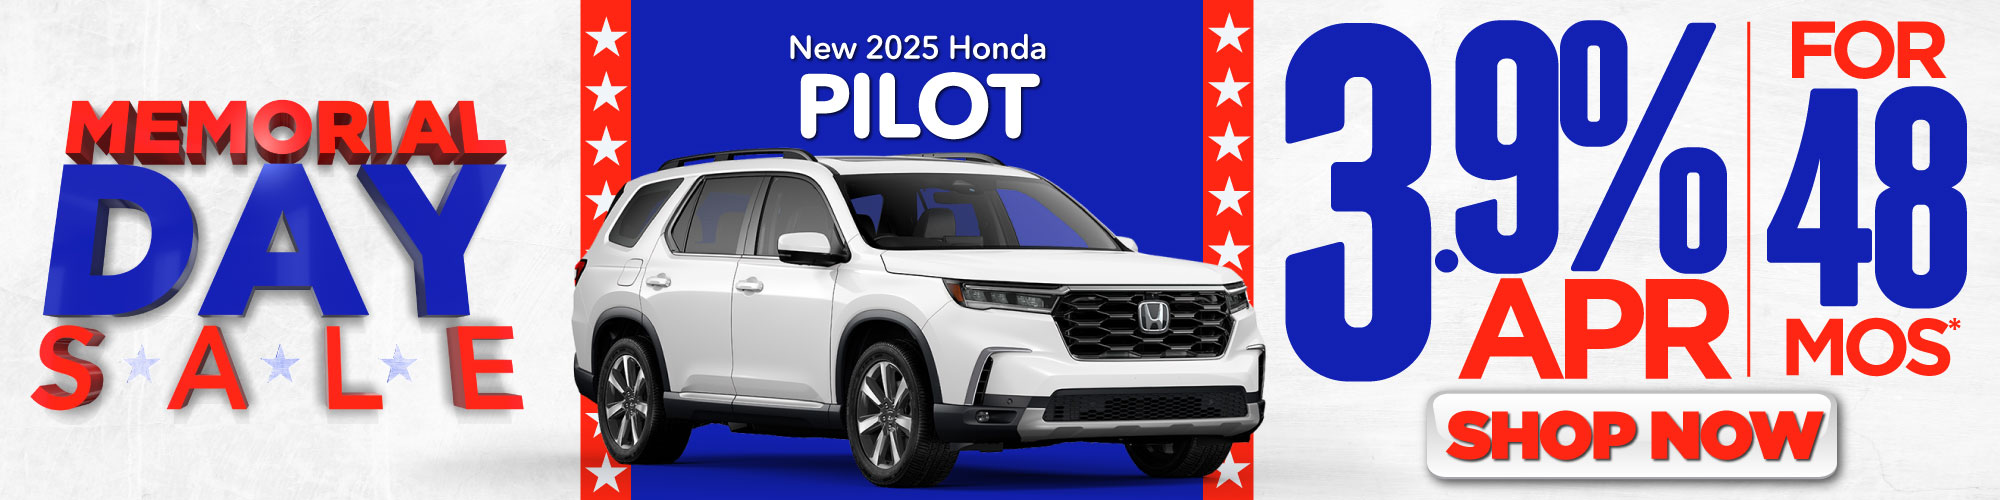 New 2022 Honda Accord or Civic Sedans | 1.9% APR for up to 24-48 months or 2.9% APR for up to 49-60 months or 3.9% APR for up to 61-72 months | Act Now